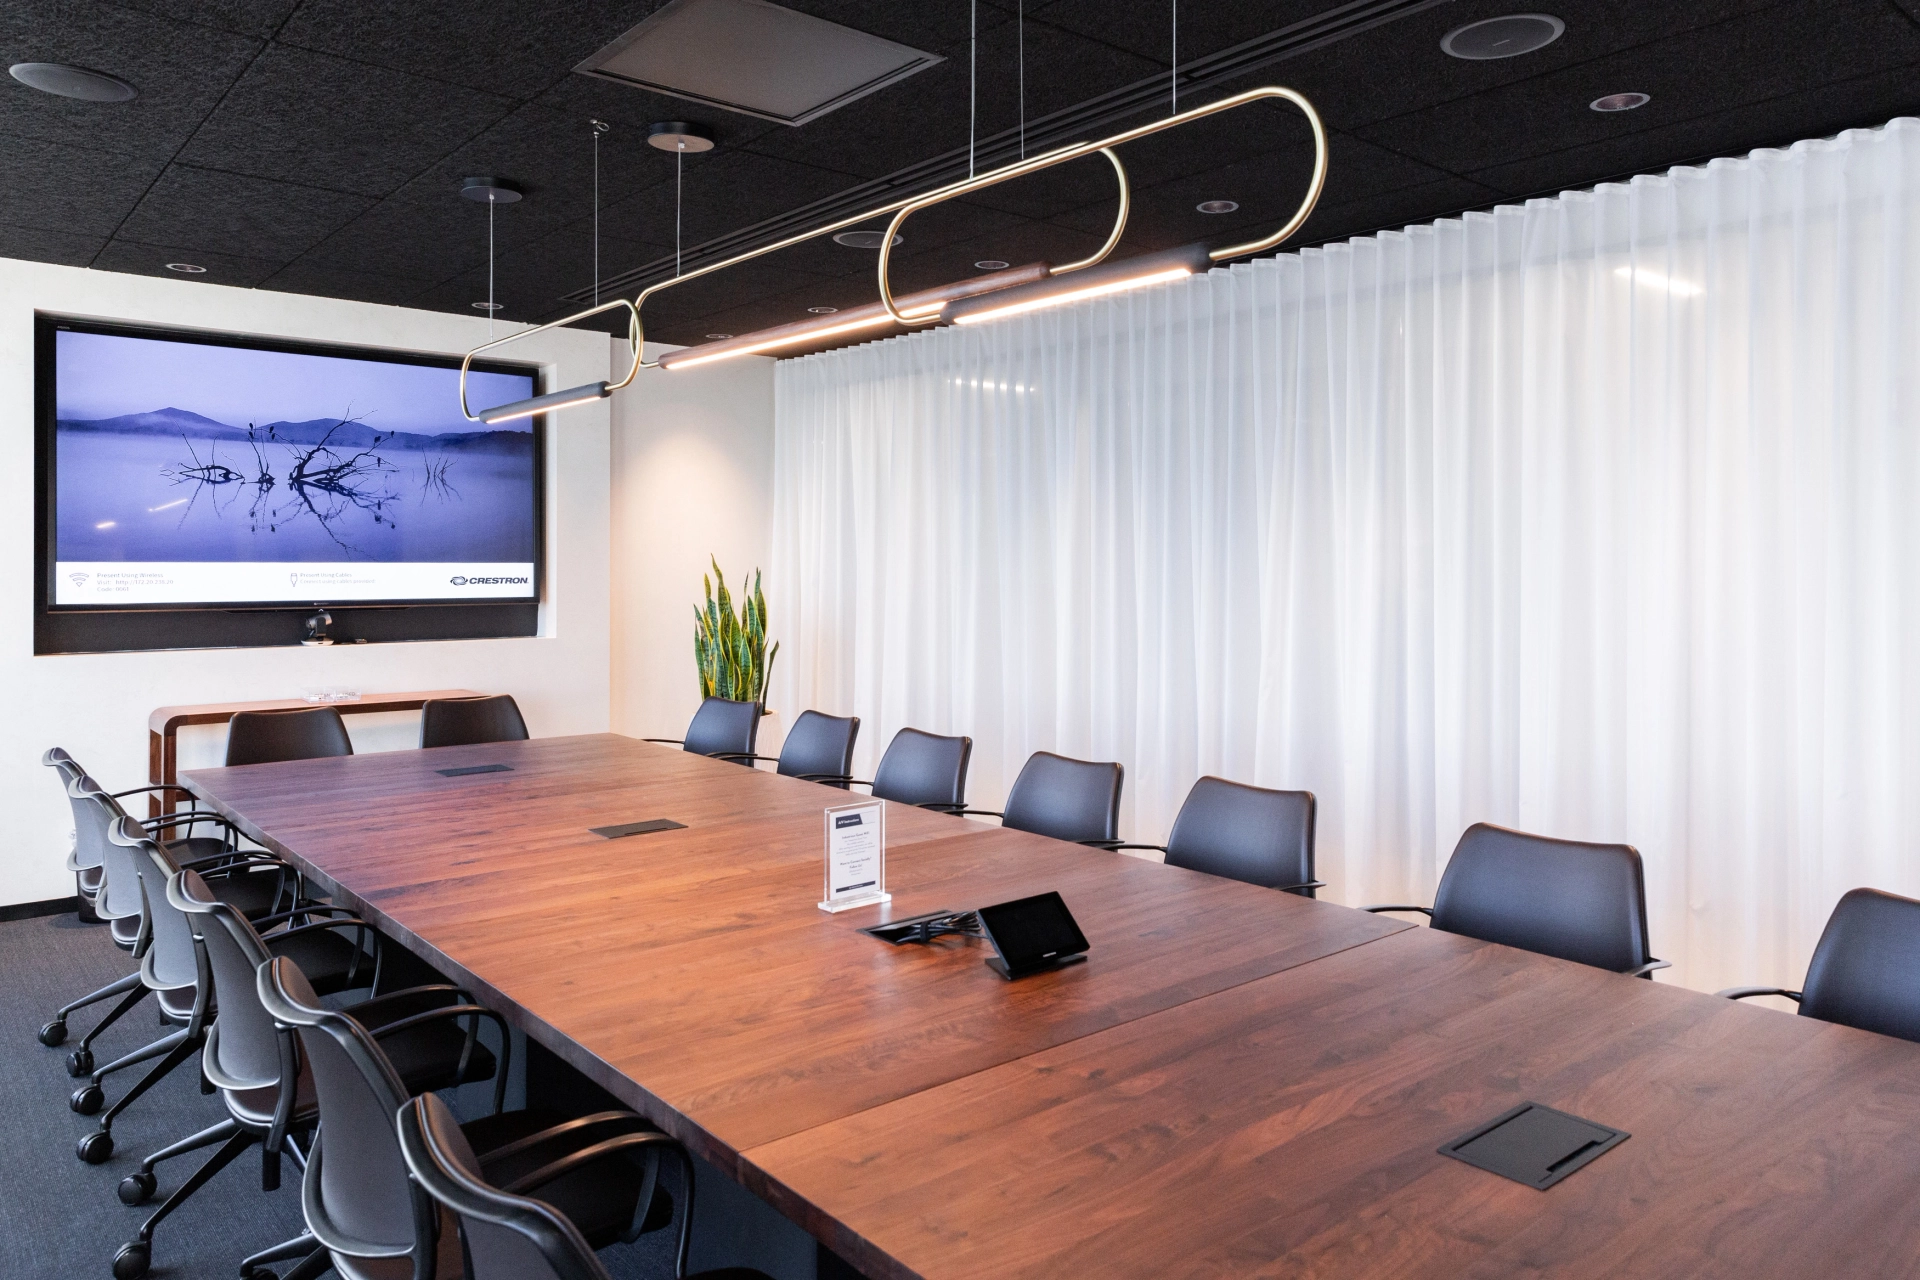 A meeting room with a large screen on the wall.